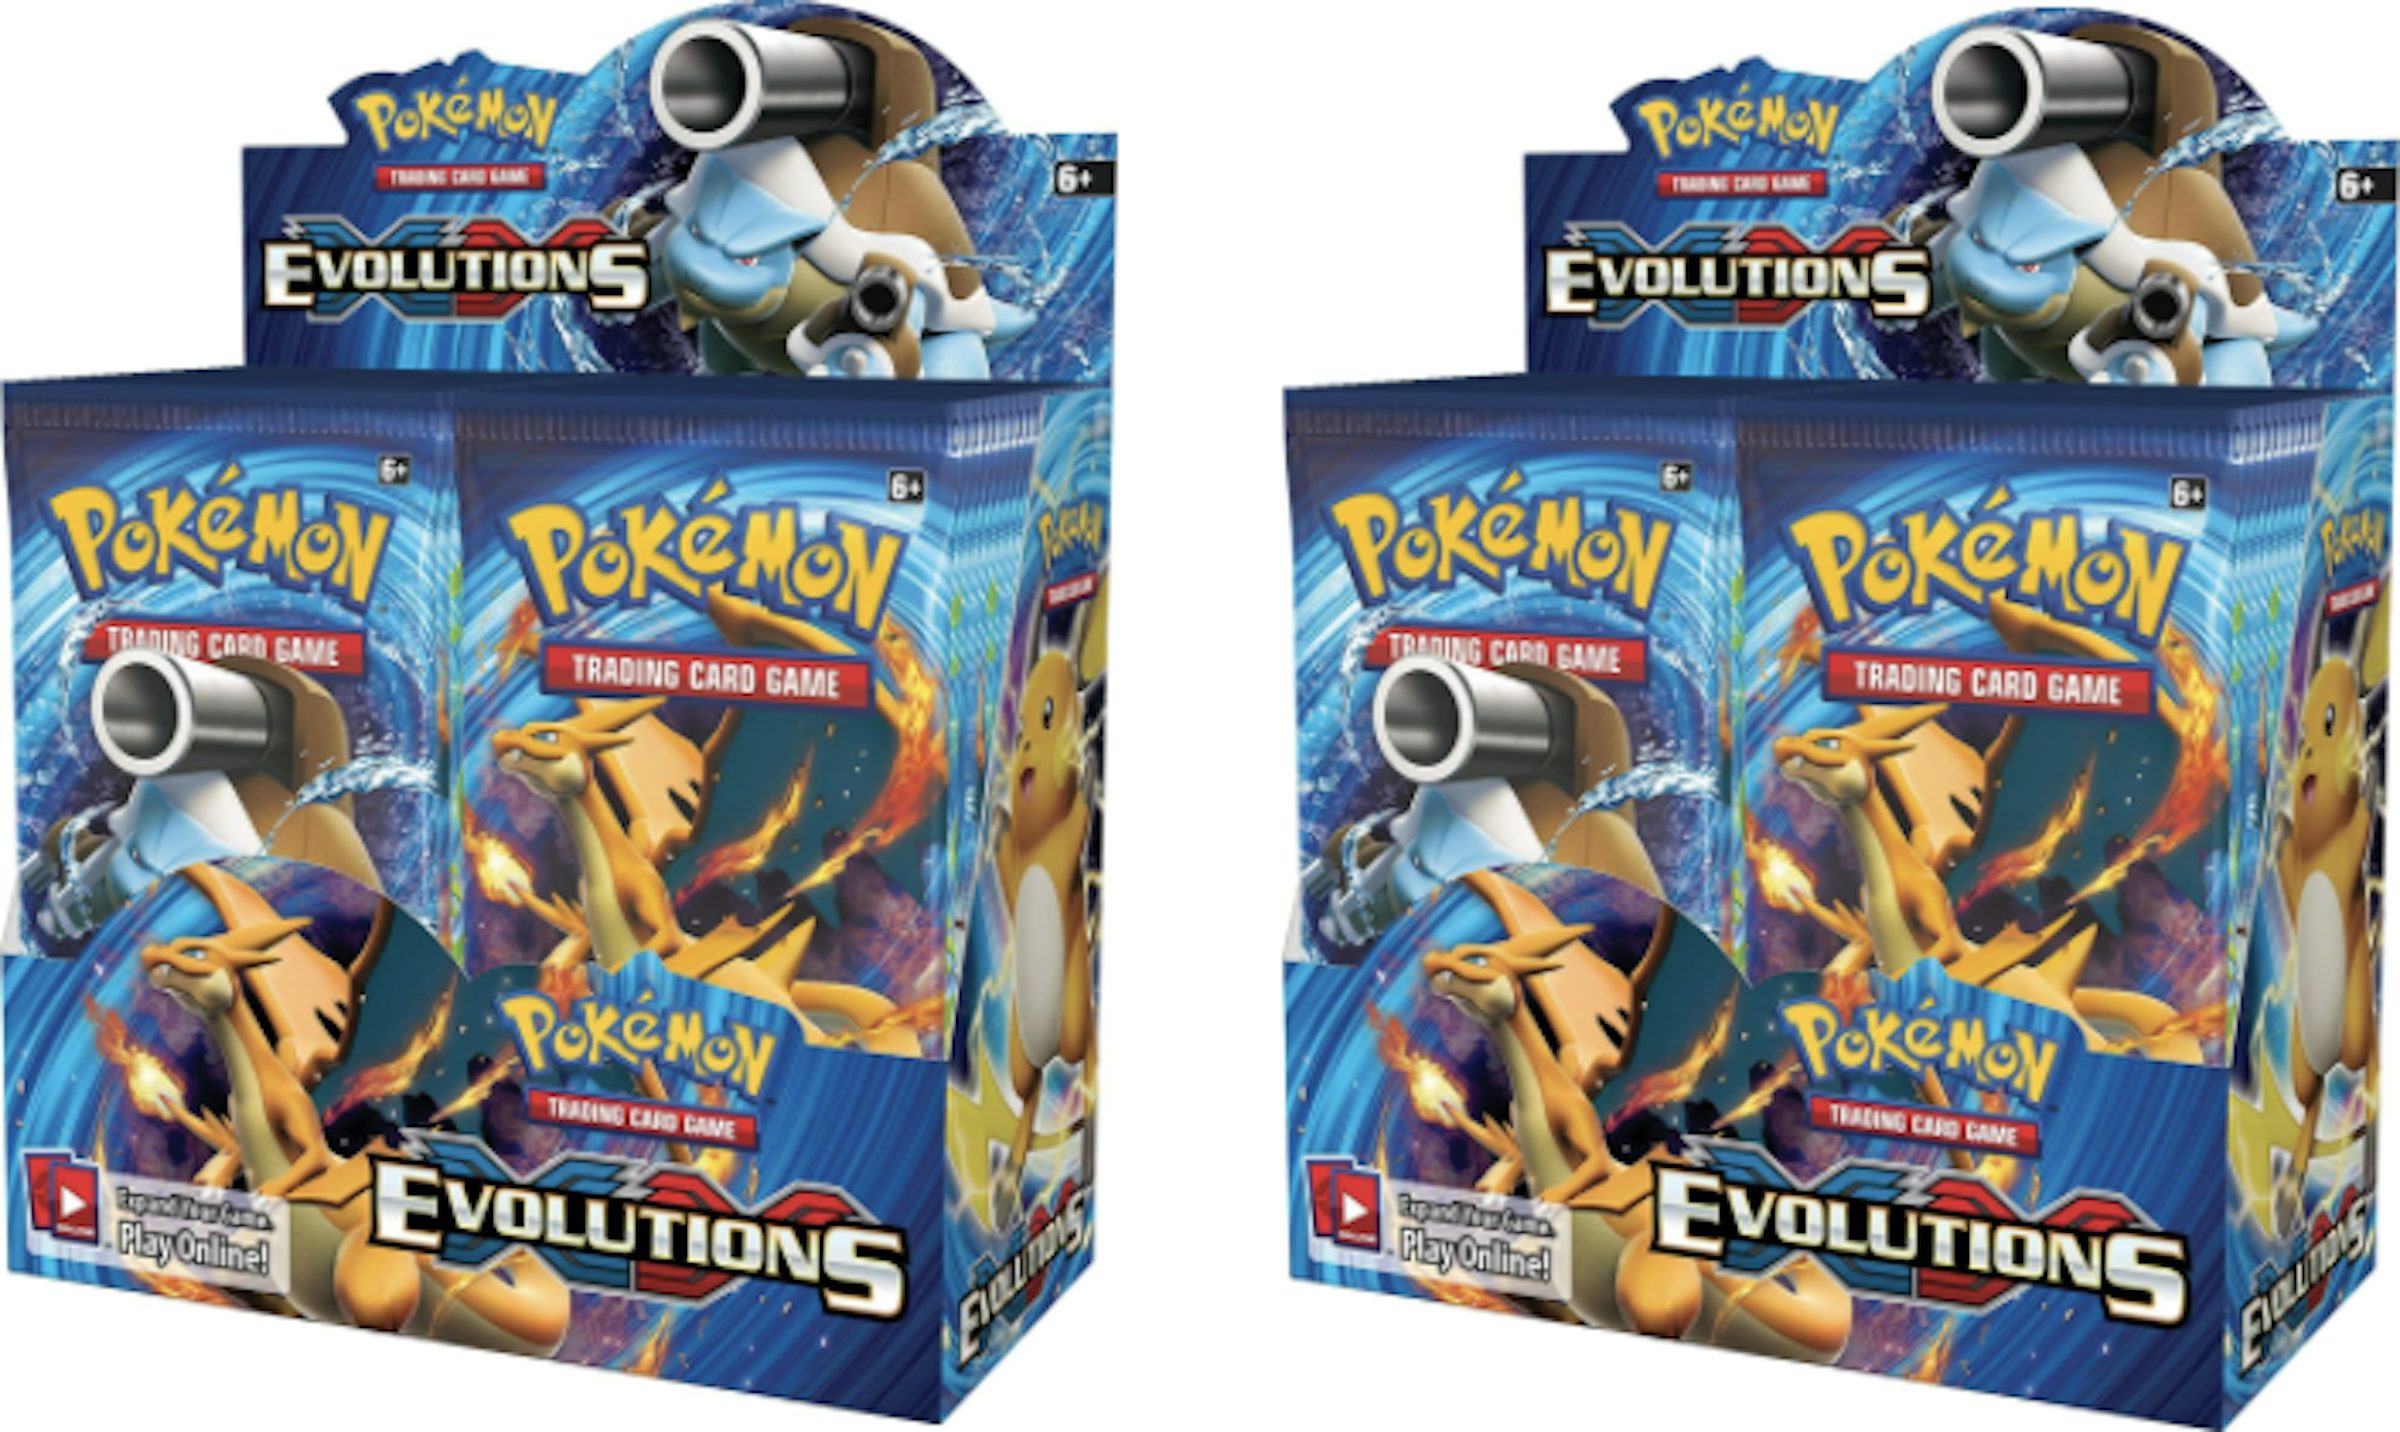 https://images.stockx.com/images/2016-Pokemon-XY-Evolutions-Booster-Box-2X-Lot.png?fit=fill&bg=FFFFFF&w=1200&h=857&fm=jpg&auto=compress&dpr=2&trim=color&updated_at=1606934069&q=60